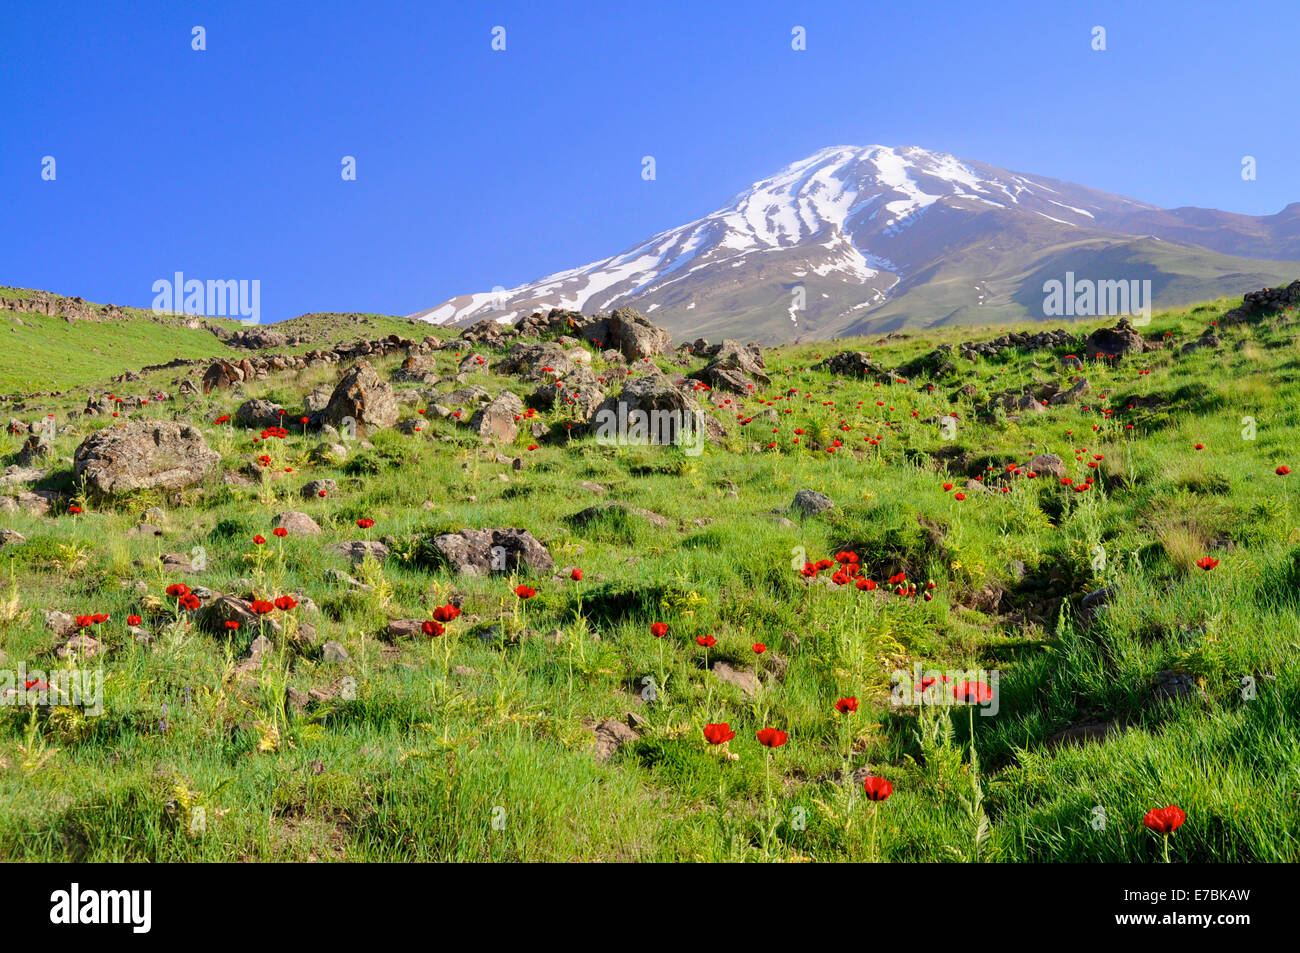 Picturesque green meadow with poppies and volcano Damavand in the background, Iran Stock Photo